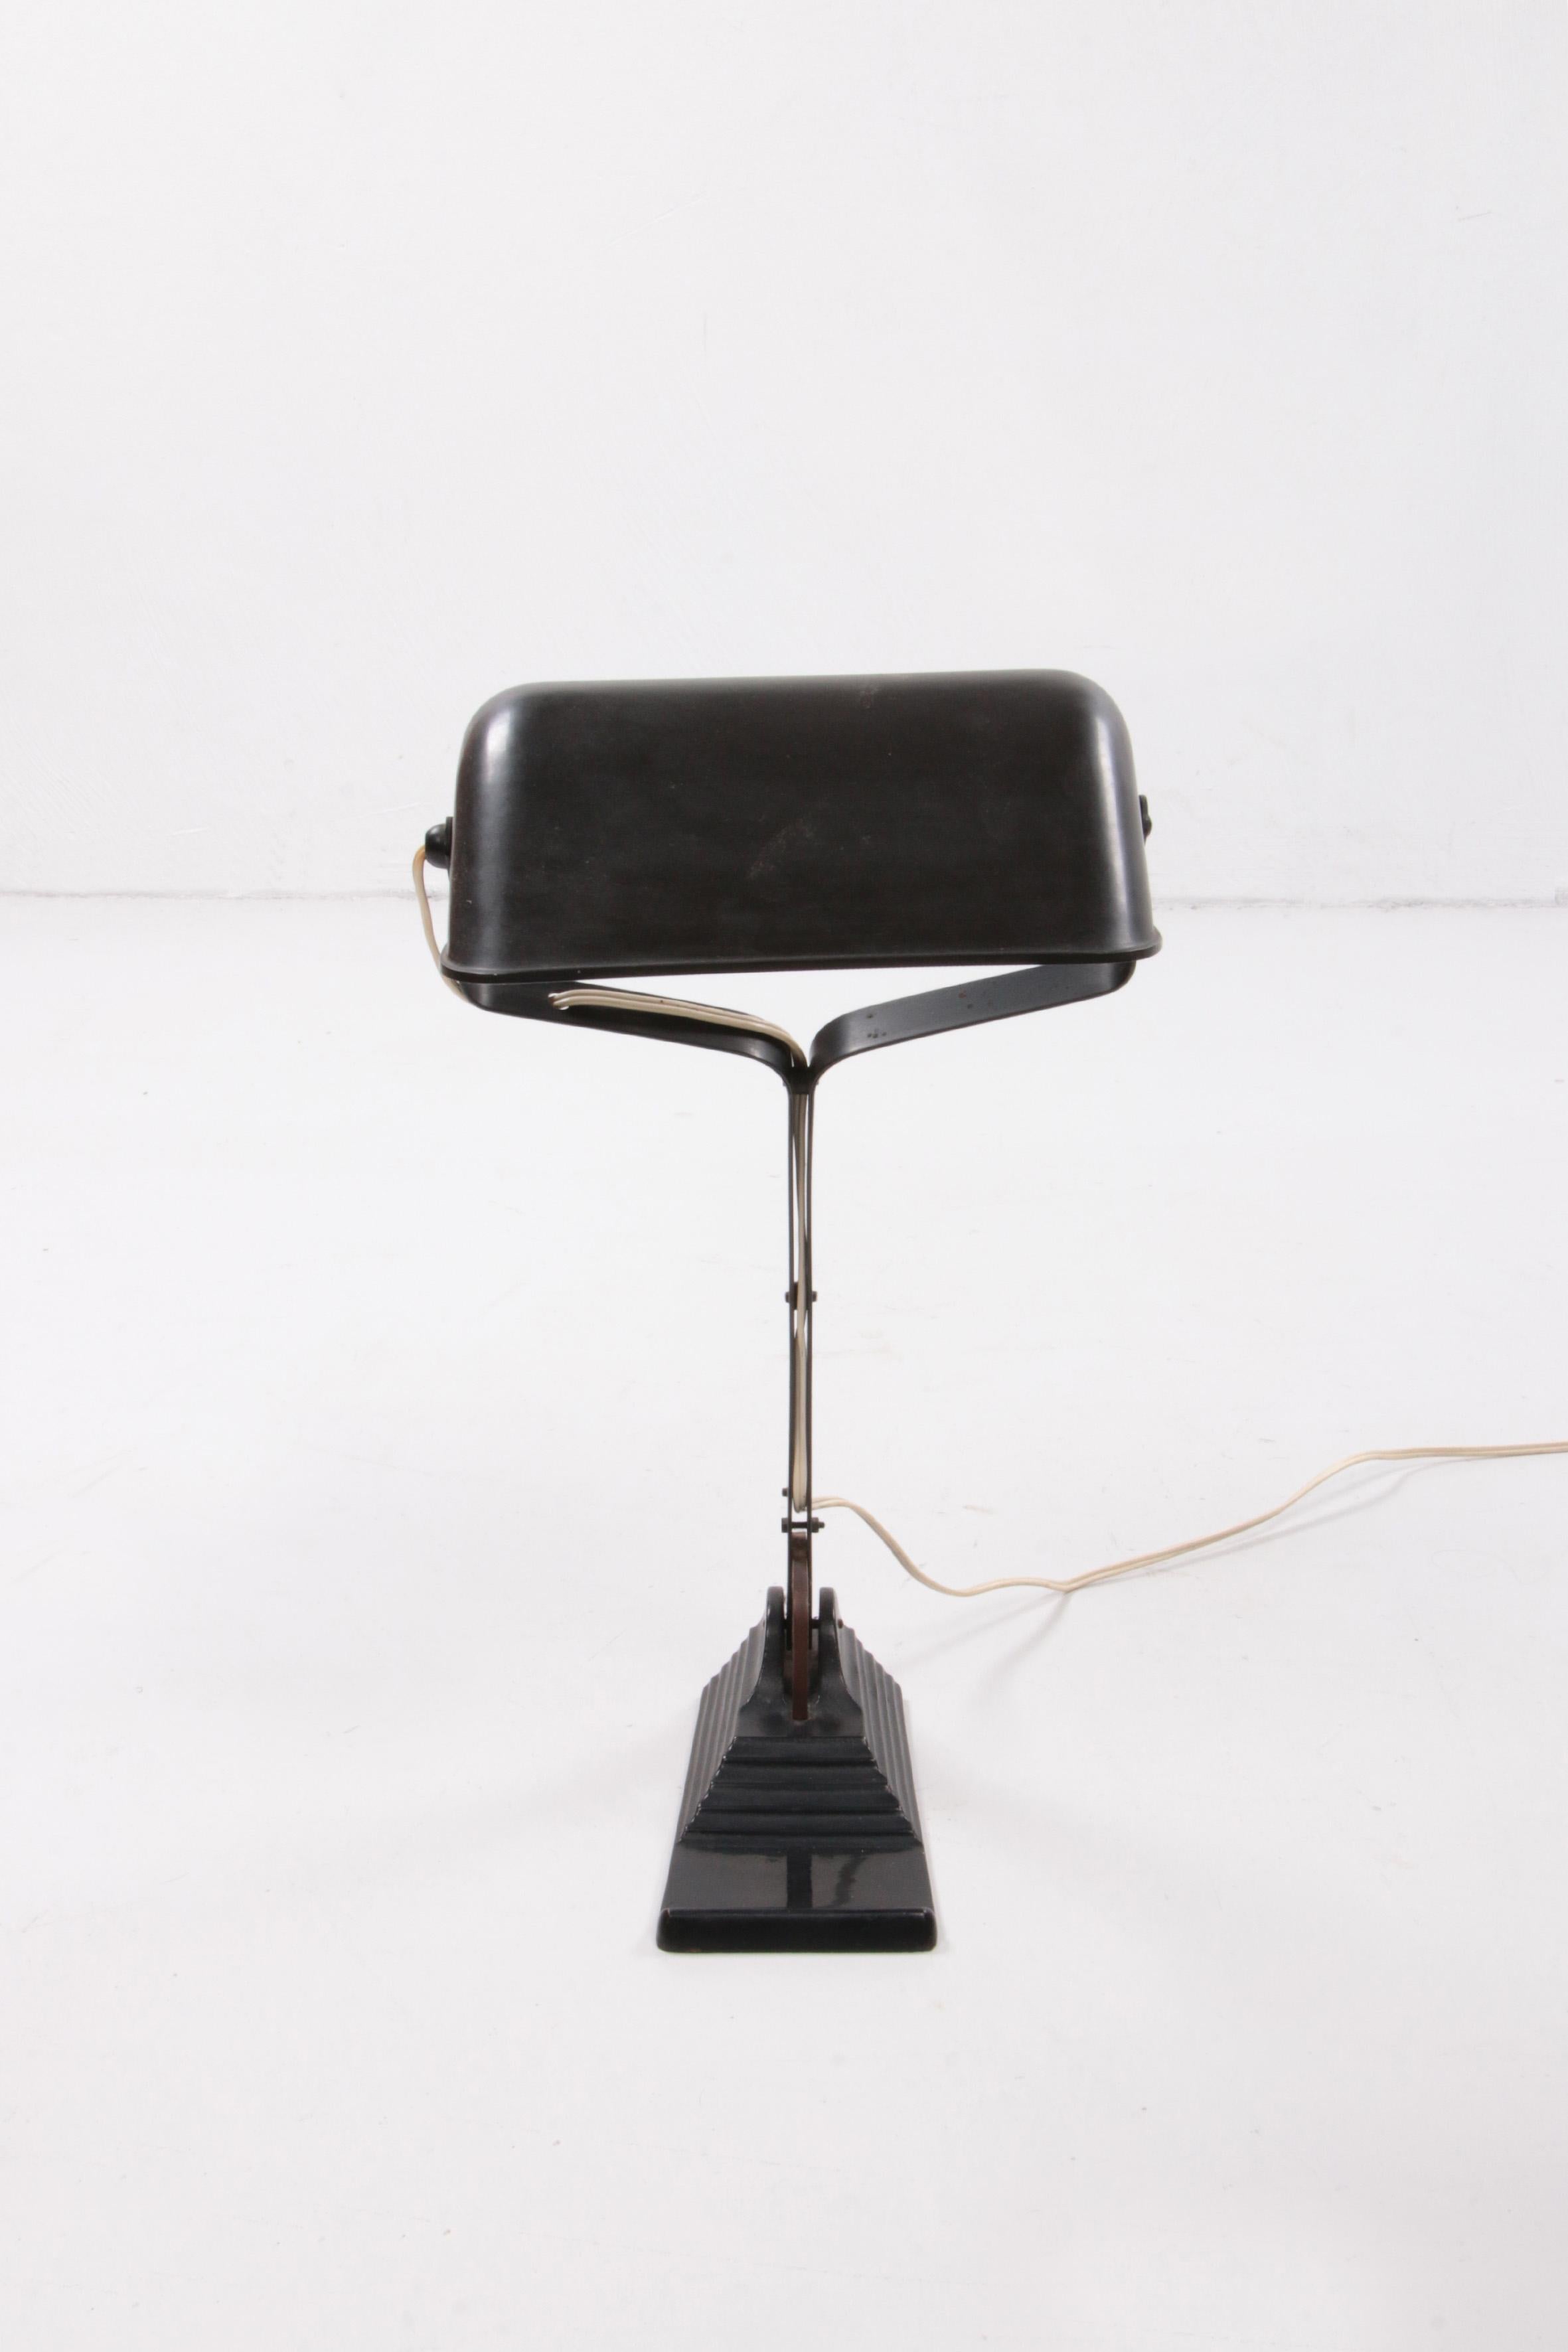 Mid-20th Century Art Deco desk lamp also called (notary lamp) made by Erpe Belgium. For Sale